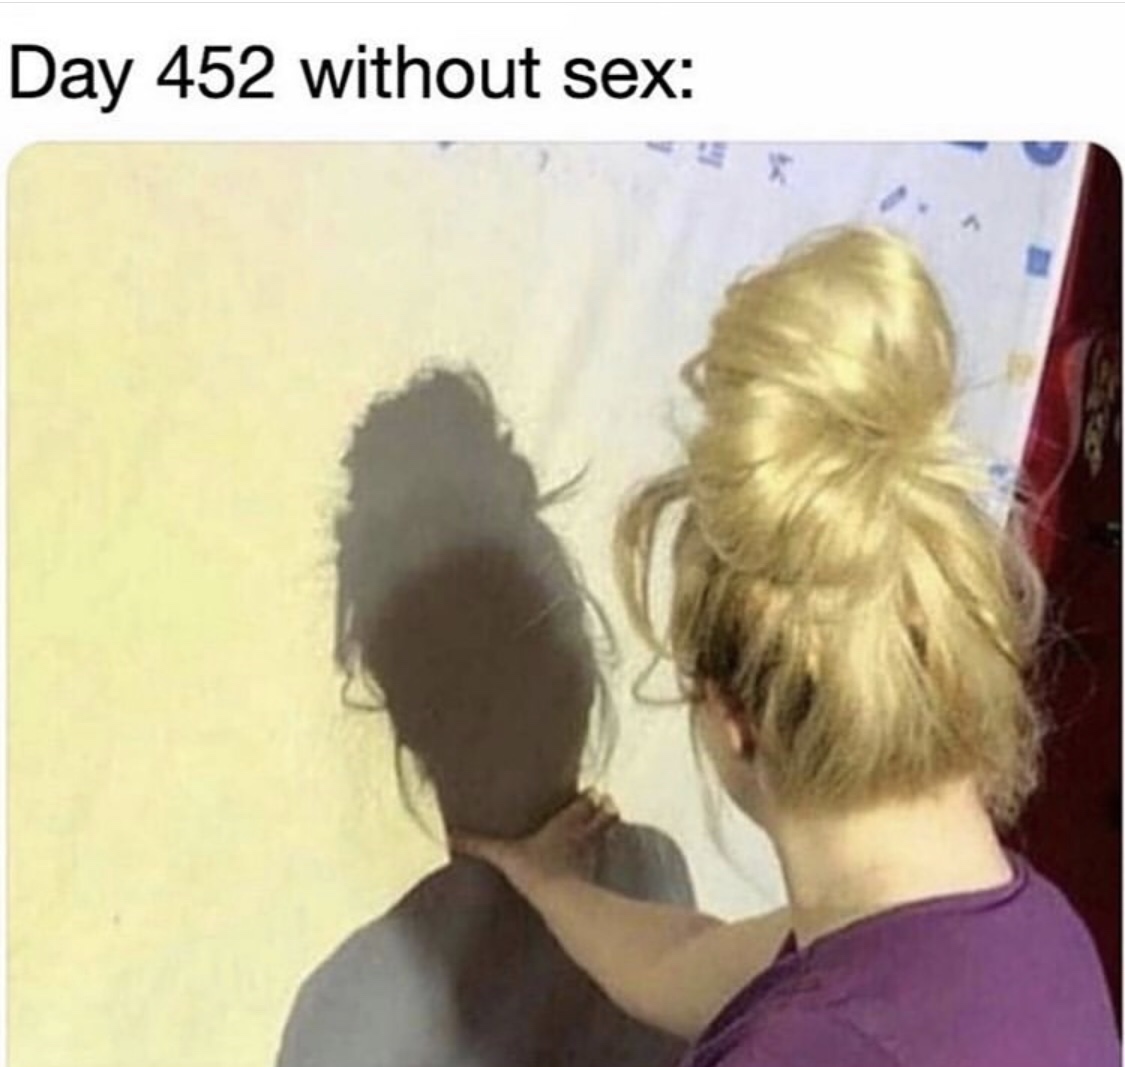 Day 452 without sex